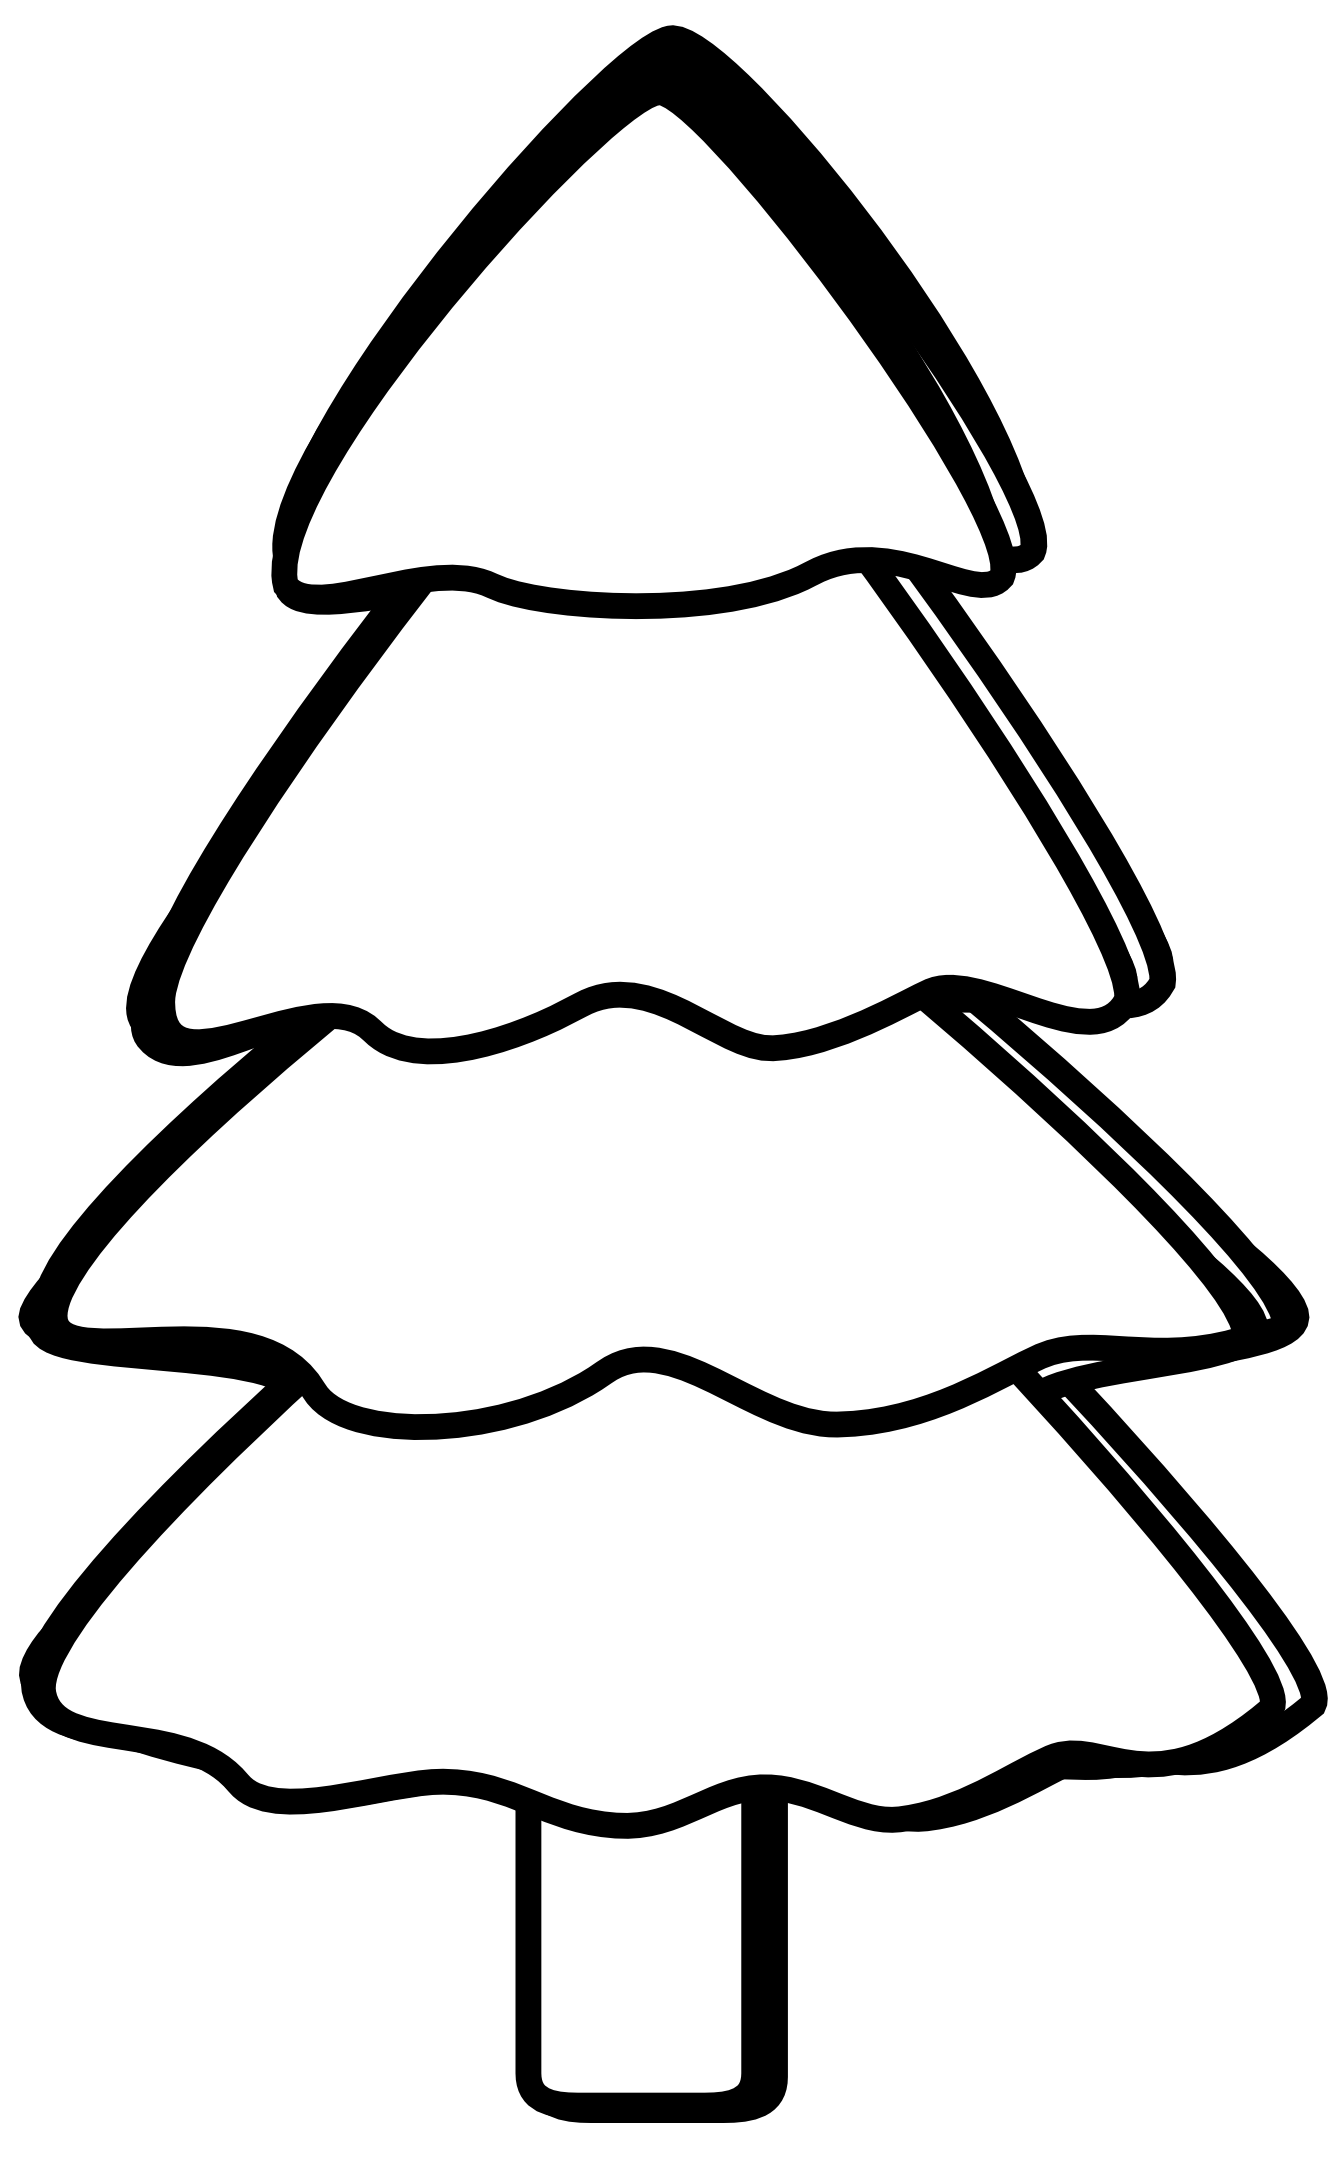 free black and white clipart of trees - photo #9